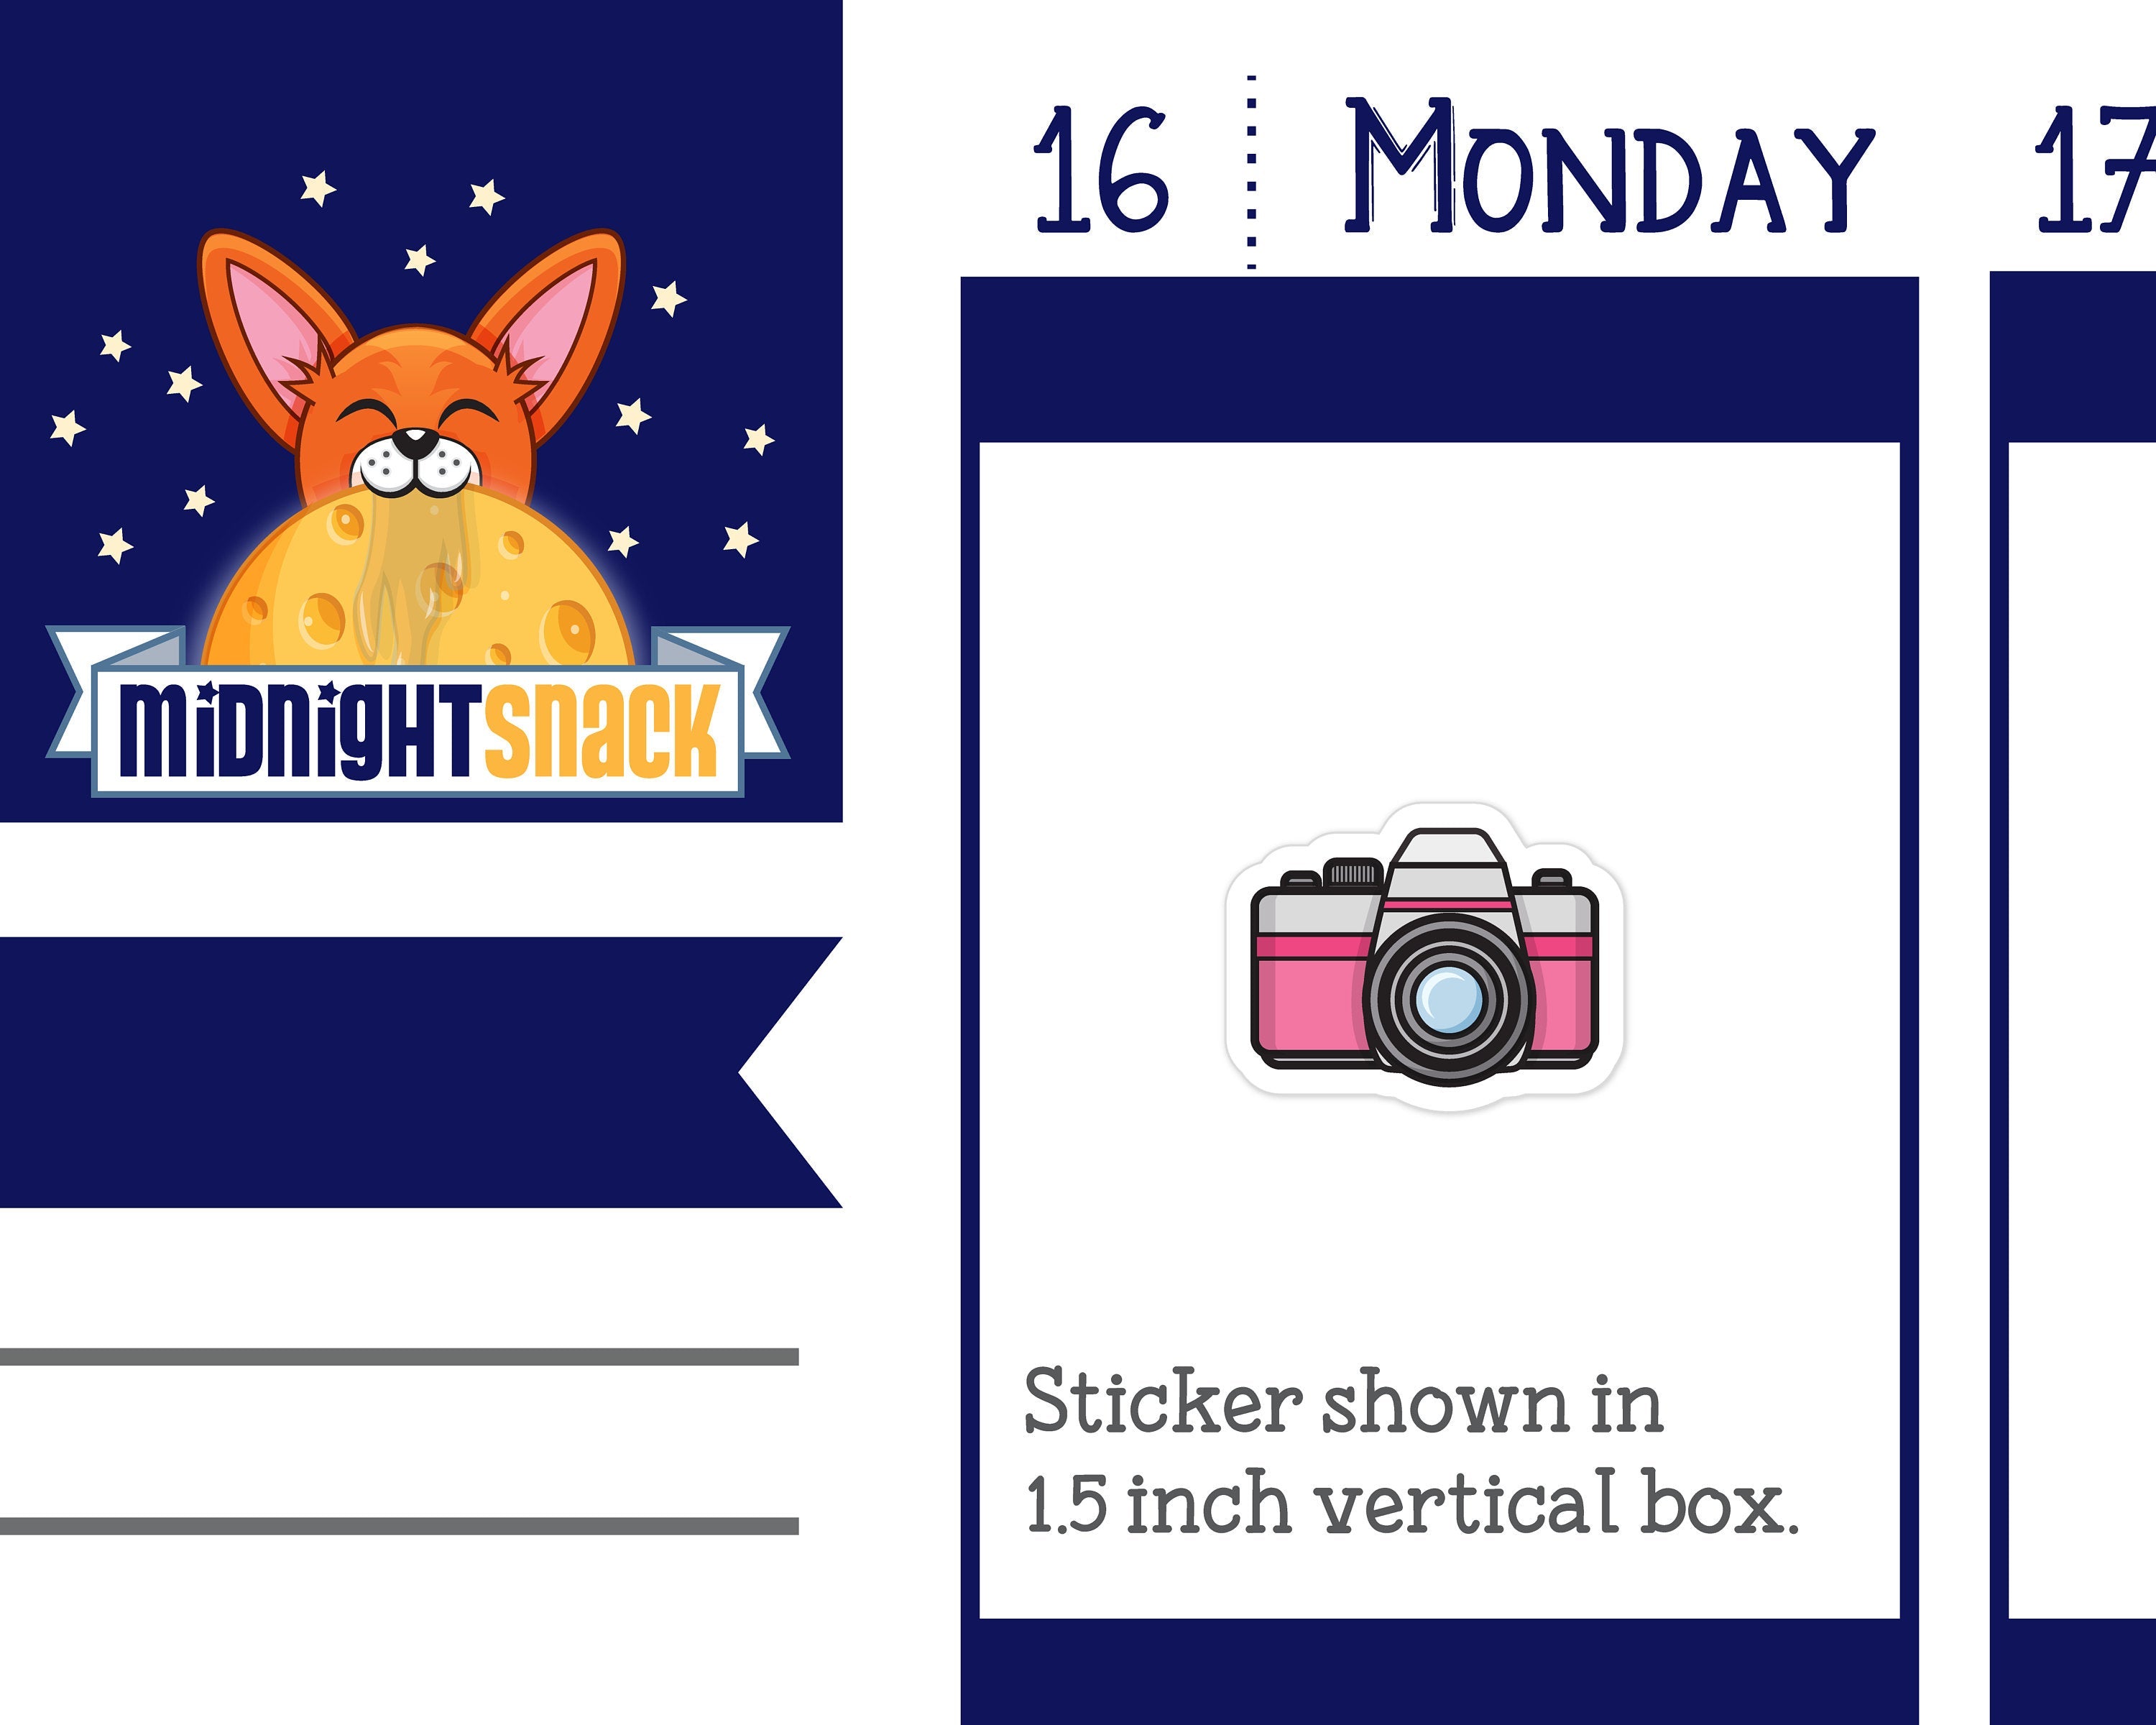 Camera Icon: Photography Planner Stickers Midnight Snack Planner